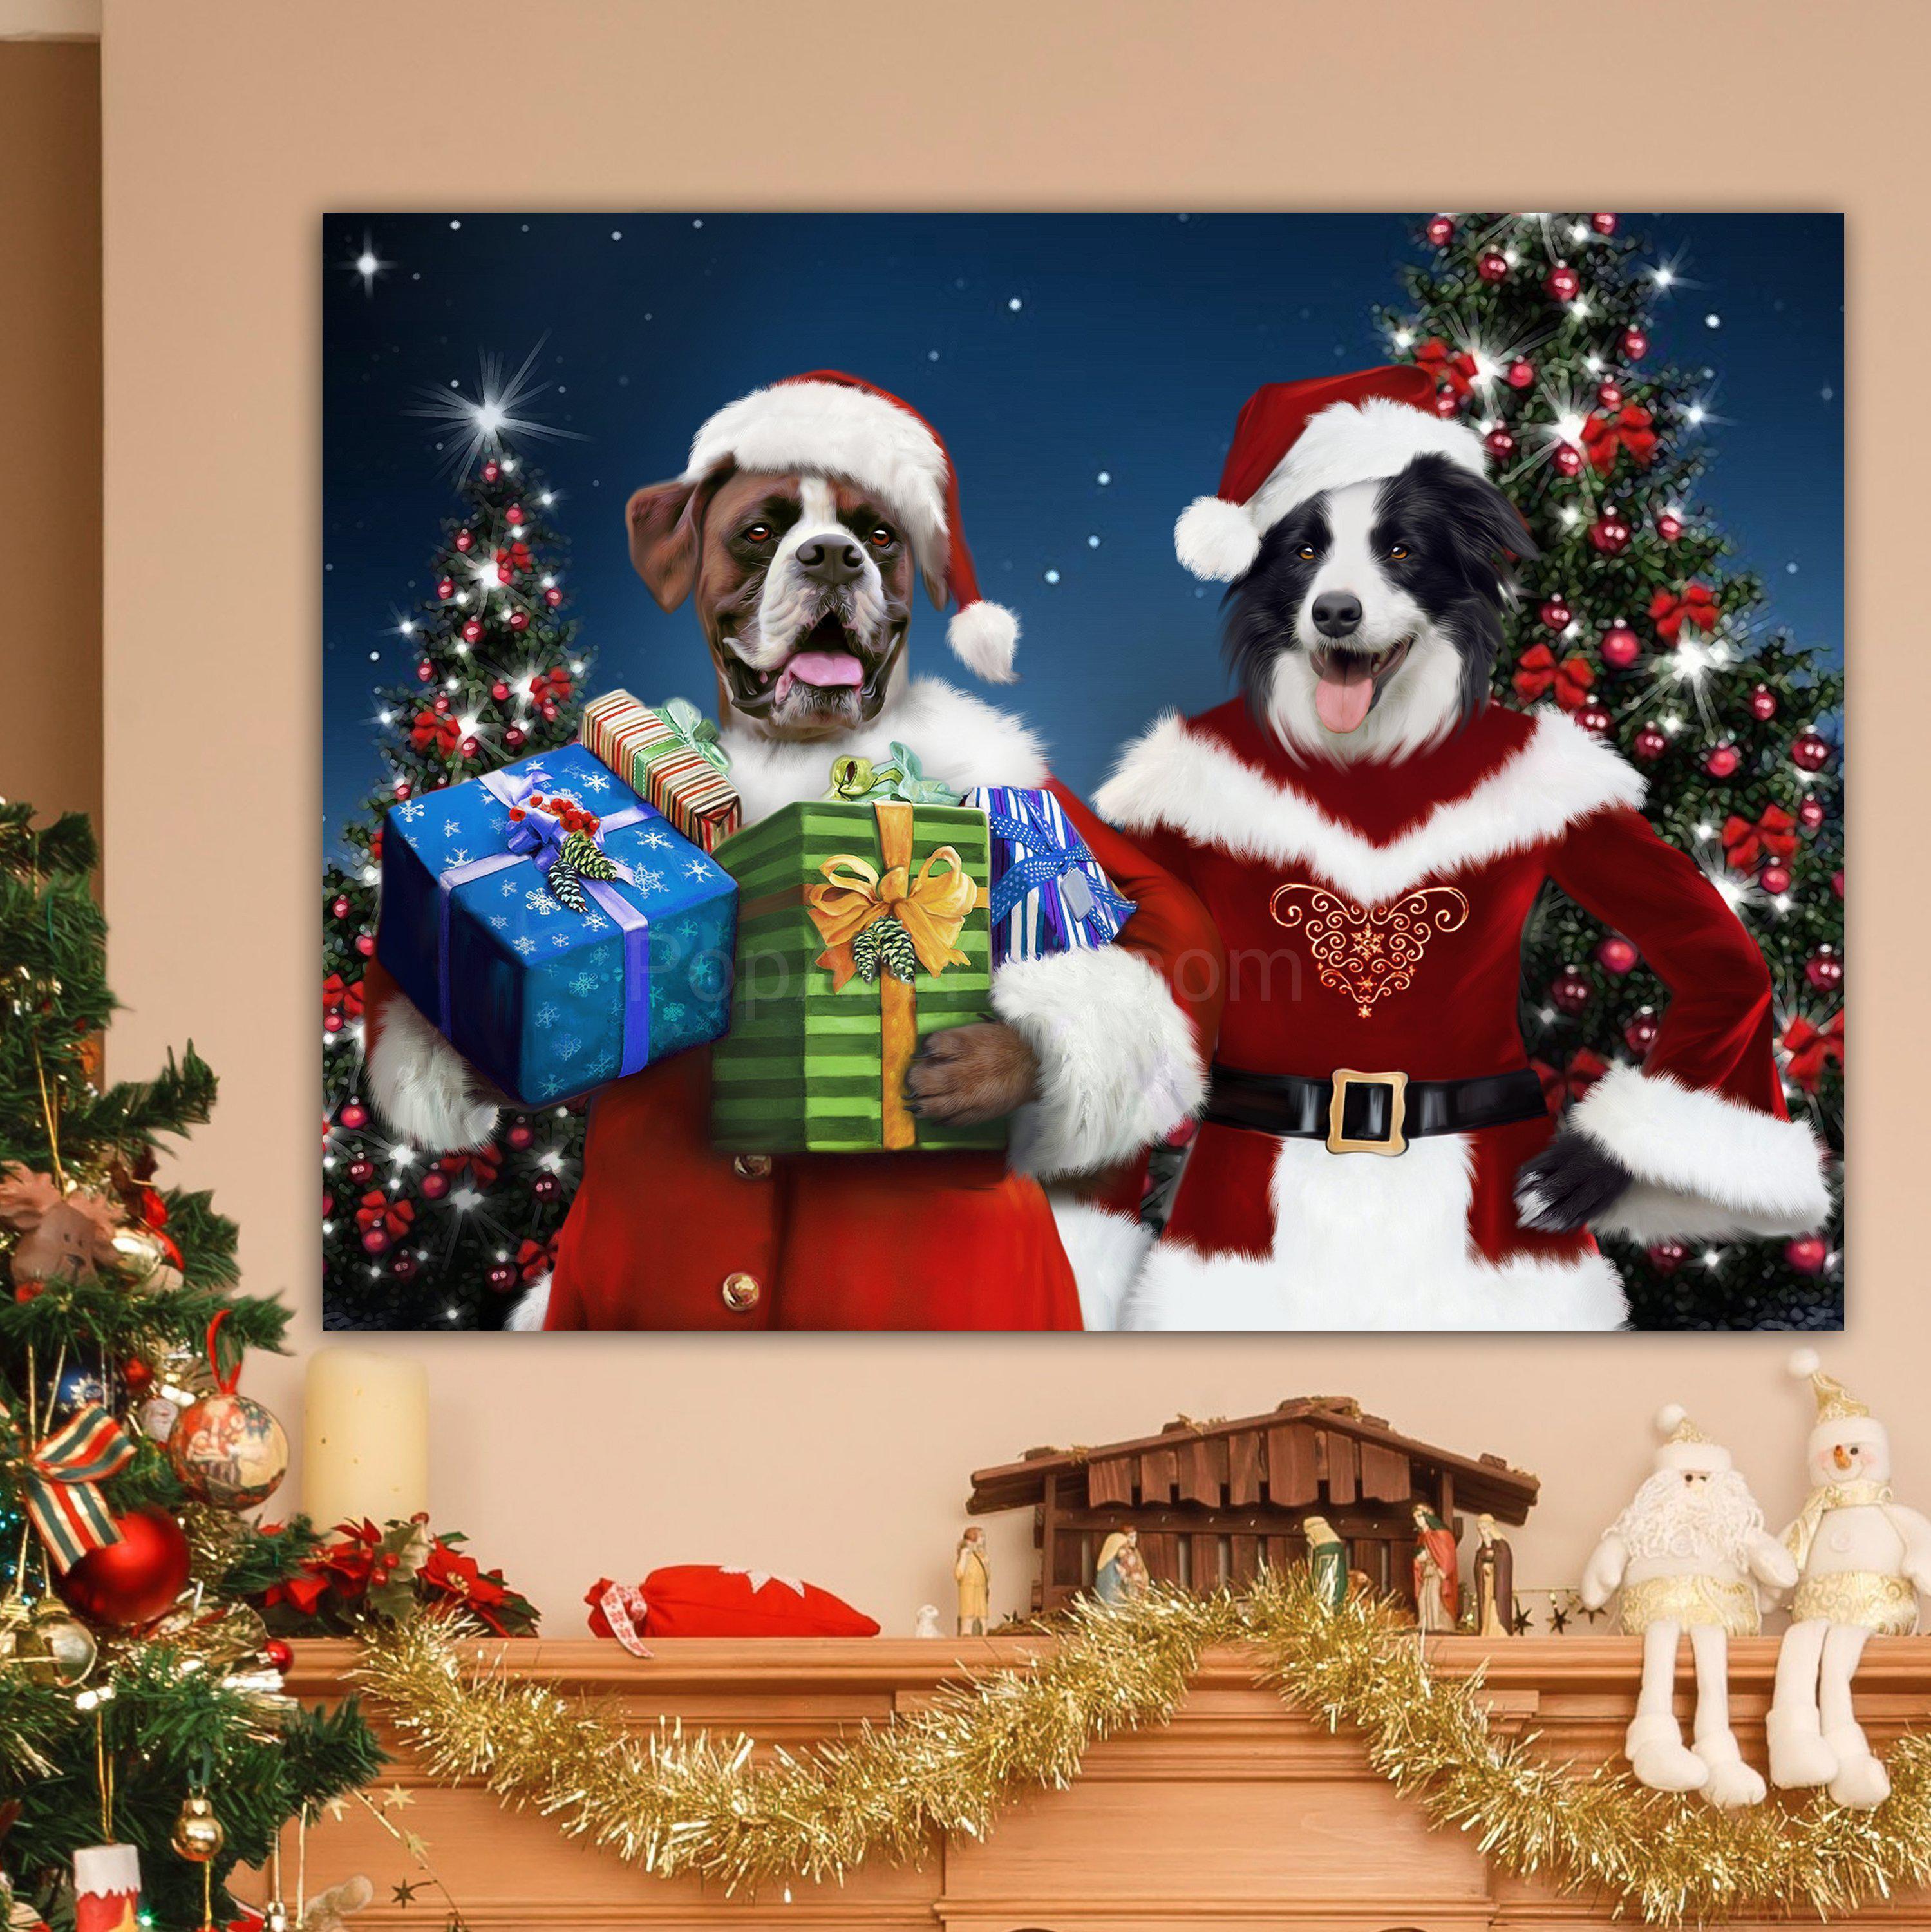 Portrait of two dogs with human bodies dressed in red costumes of Santa and Mrs. Claus hangs on the beige wall near the christmas tree